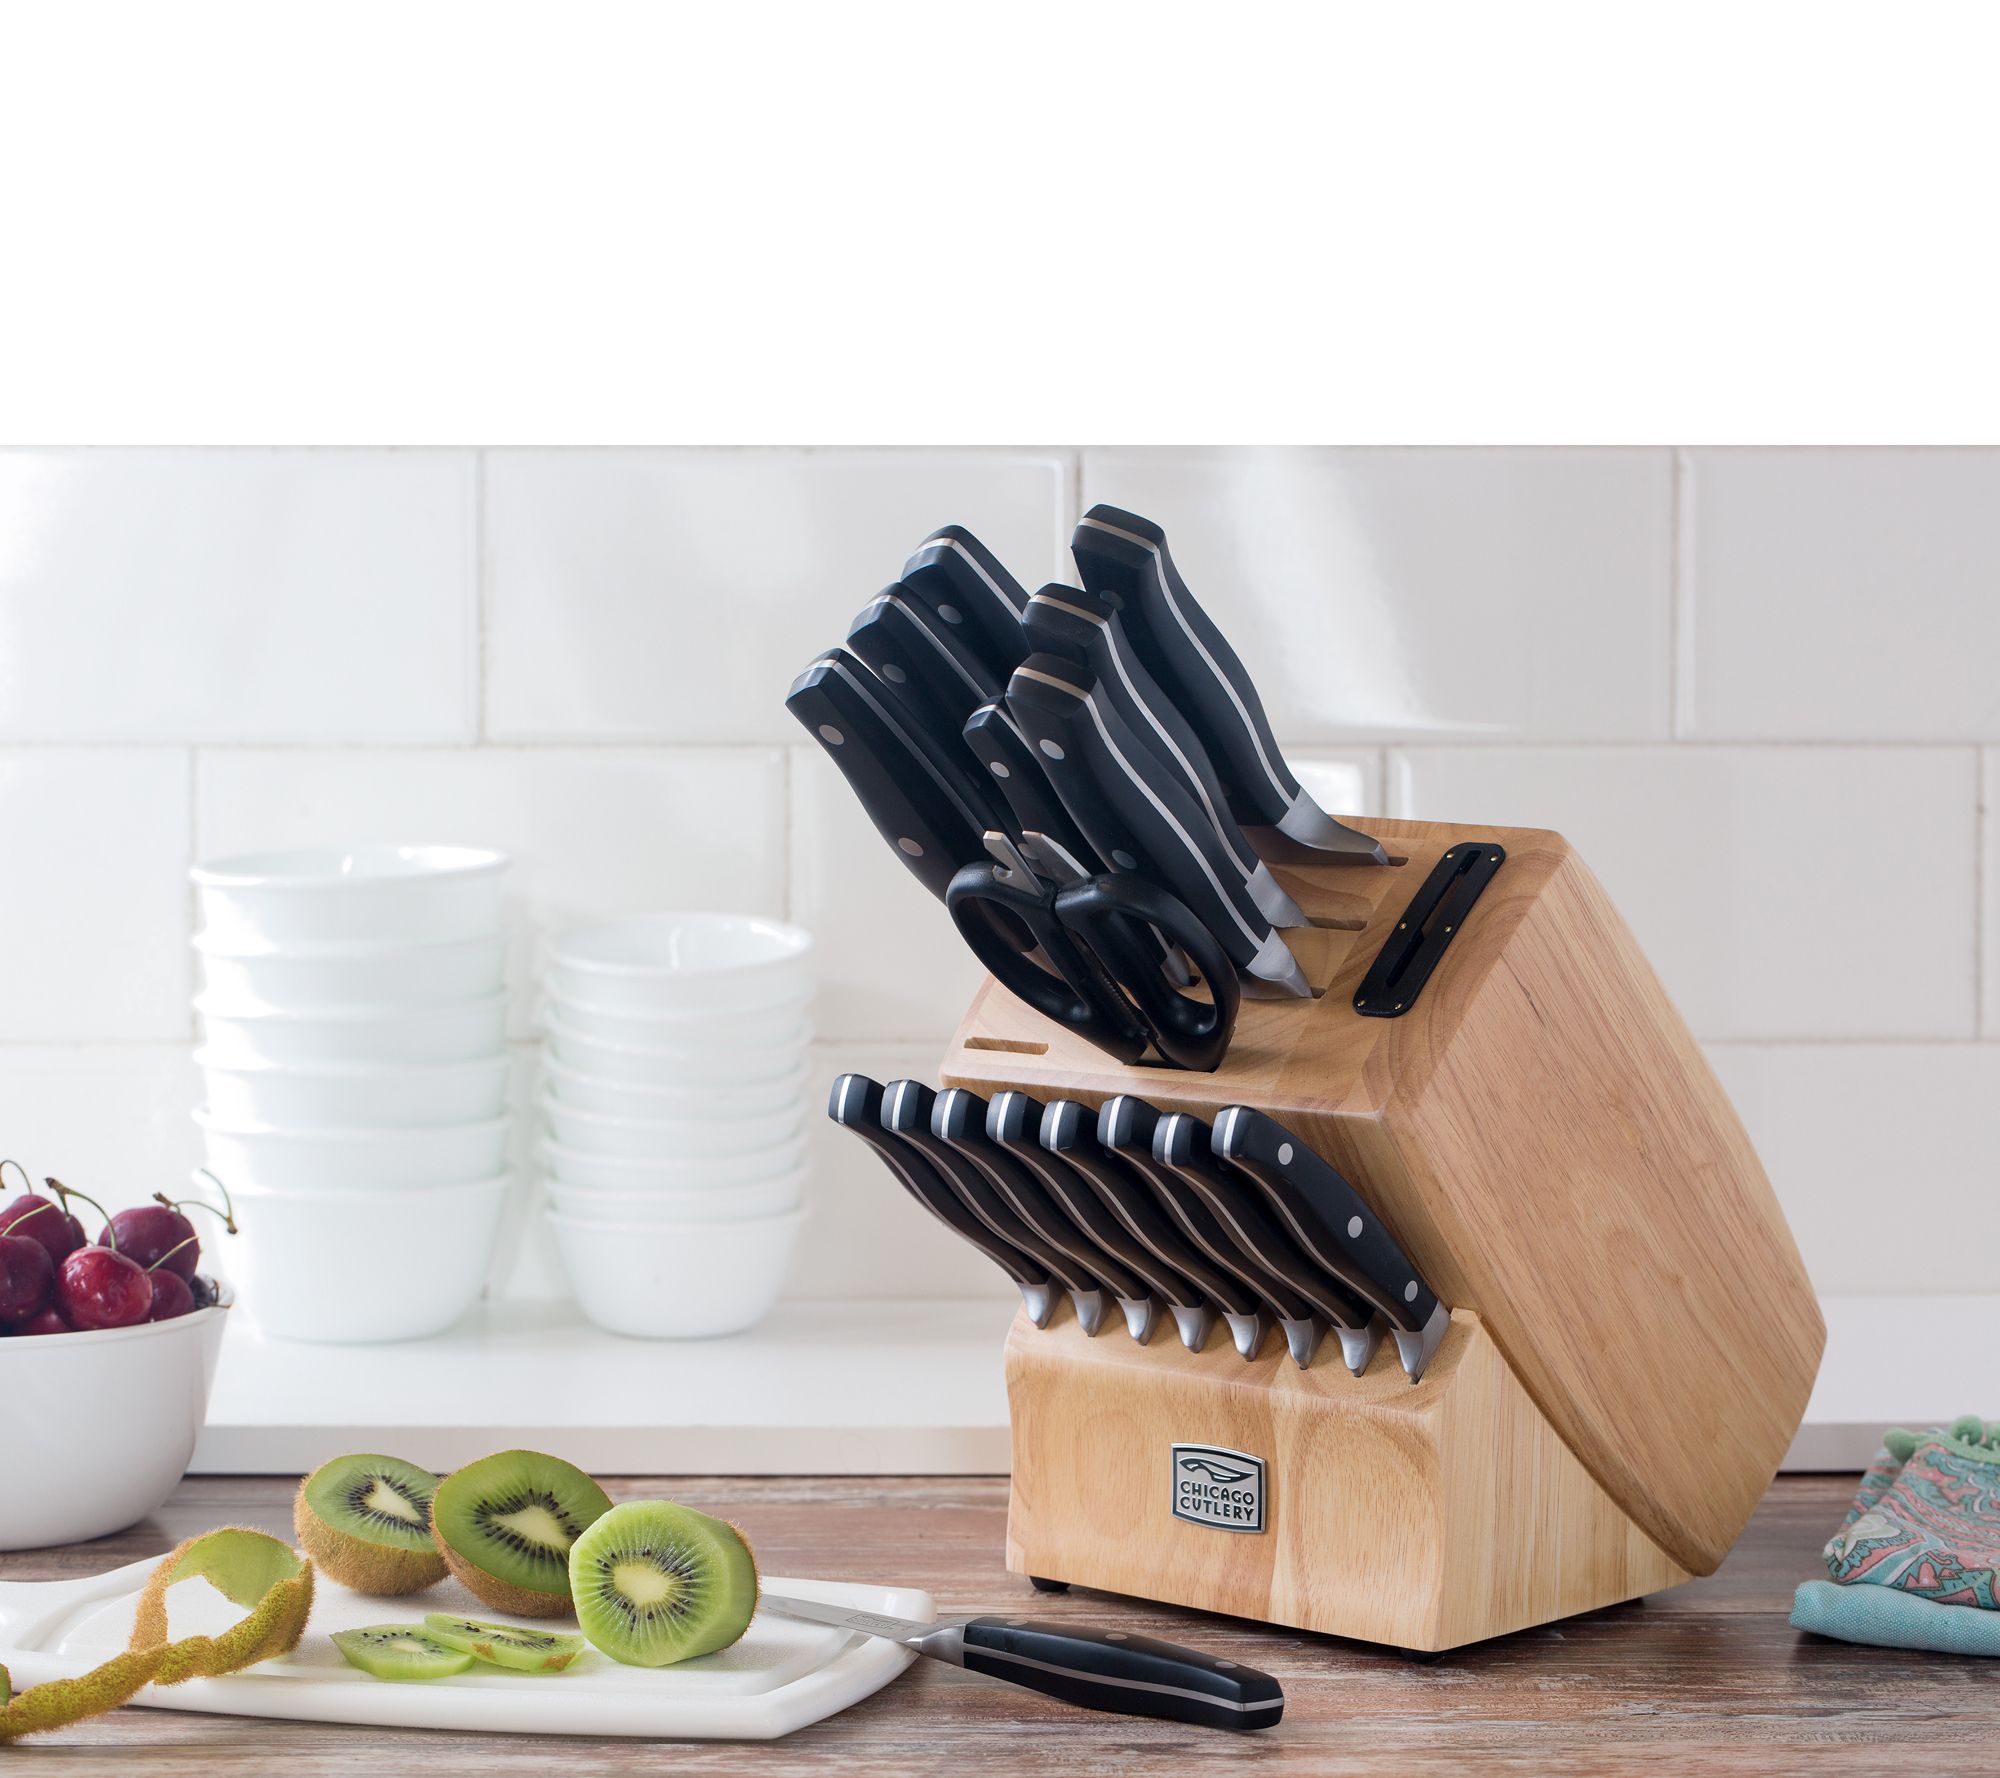 Chicago Cutlery Insignia 18-pc. Guided Grip Knife Block Set with Built-In  Sharpener